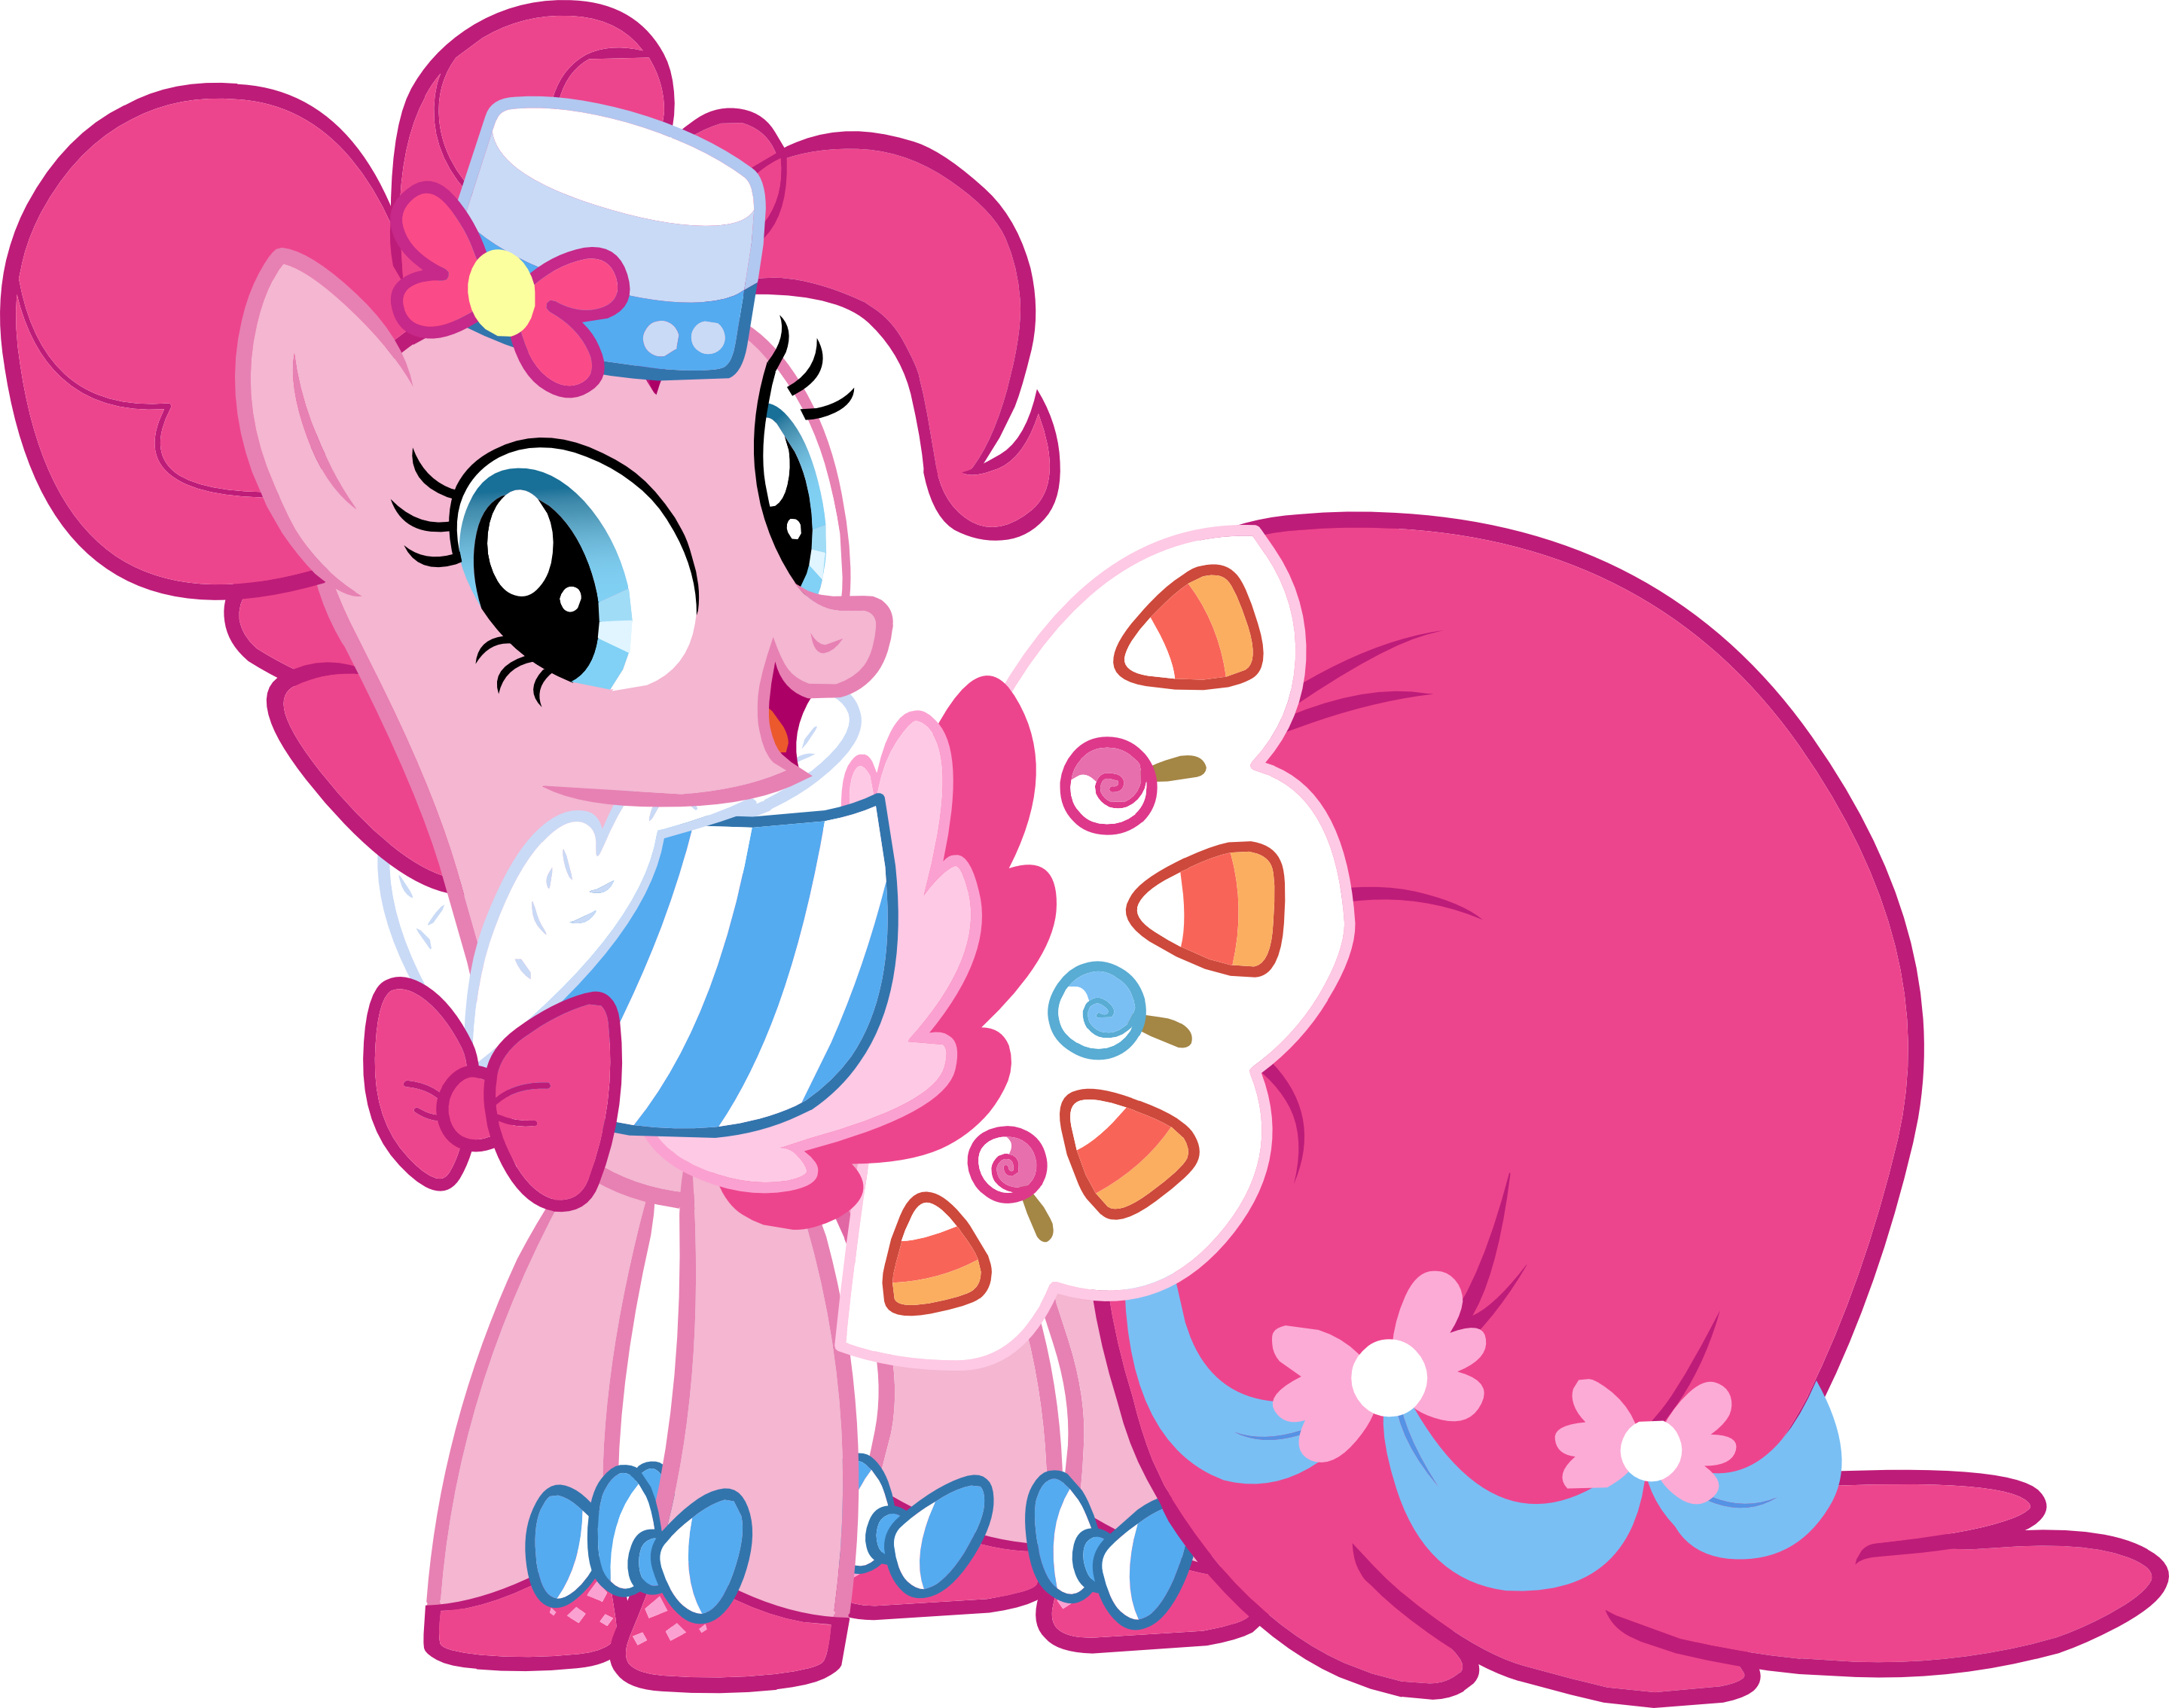 1000+ images about PINKIE PIE